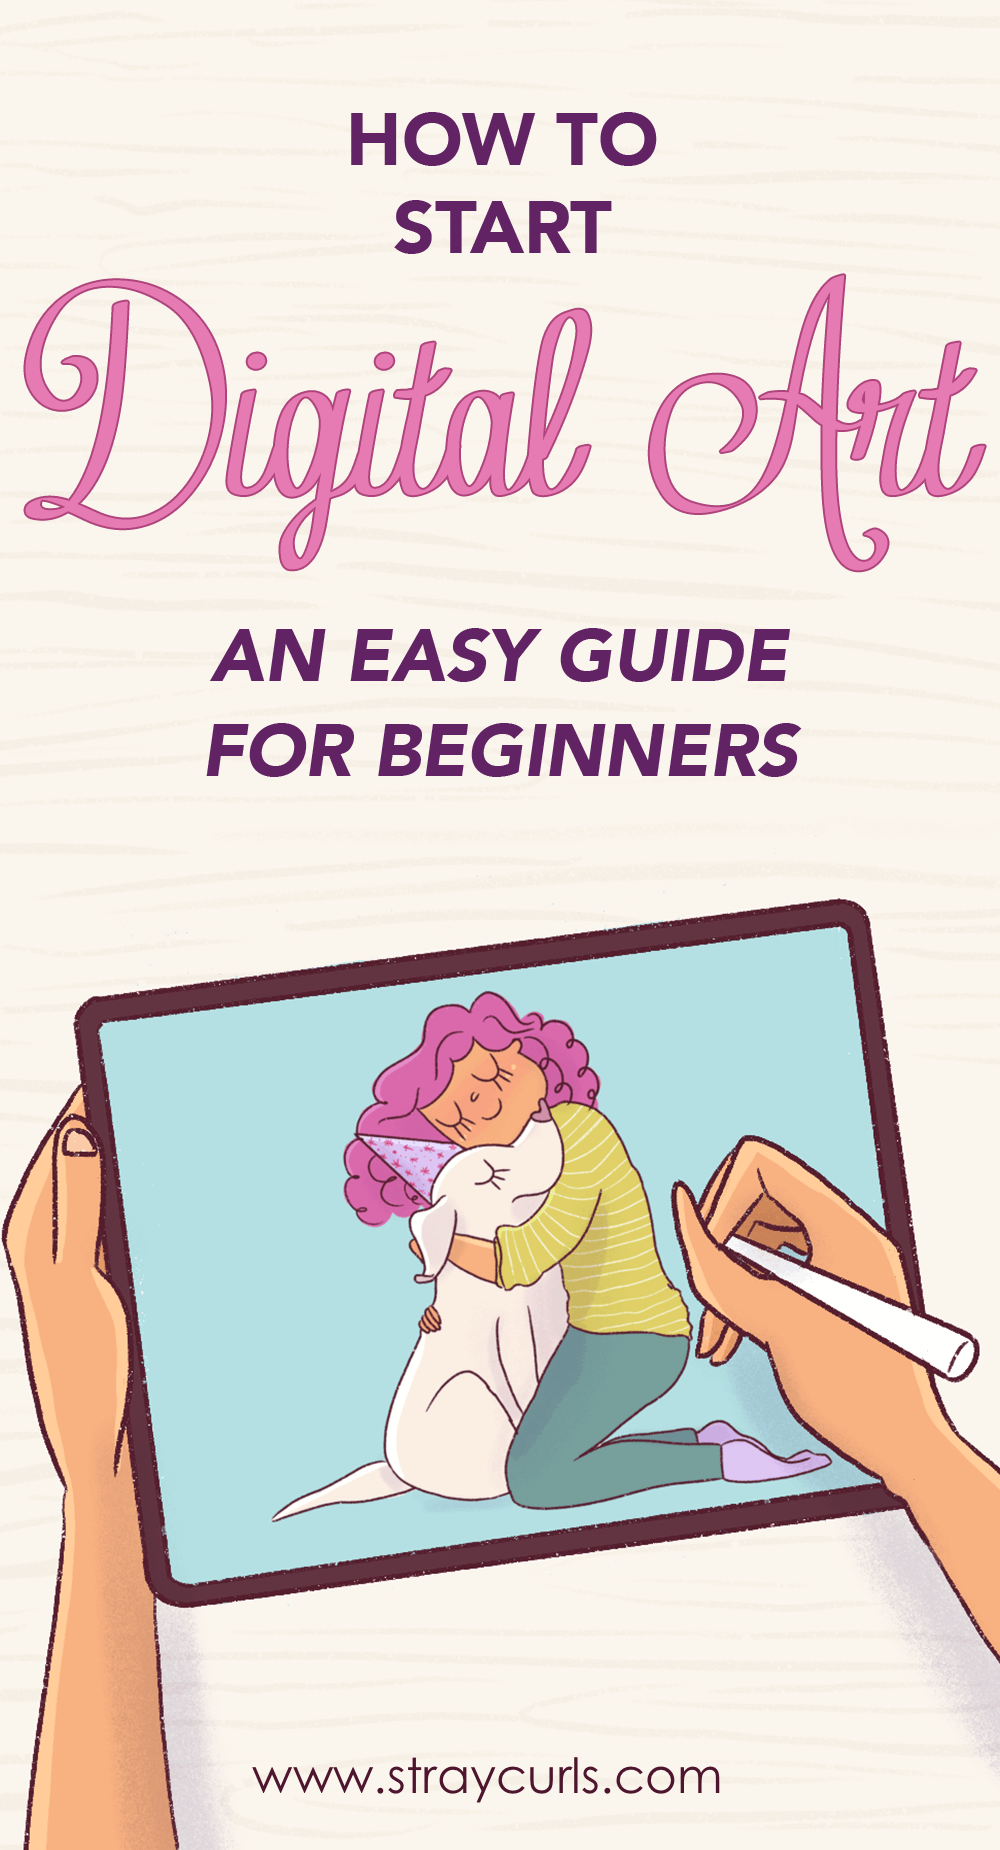 How to start digital art - an easy guide for beginners. Read this post to learn how to get started with digital art.